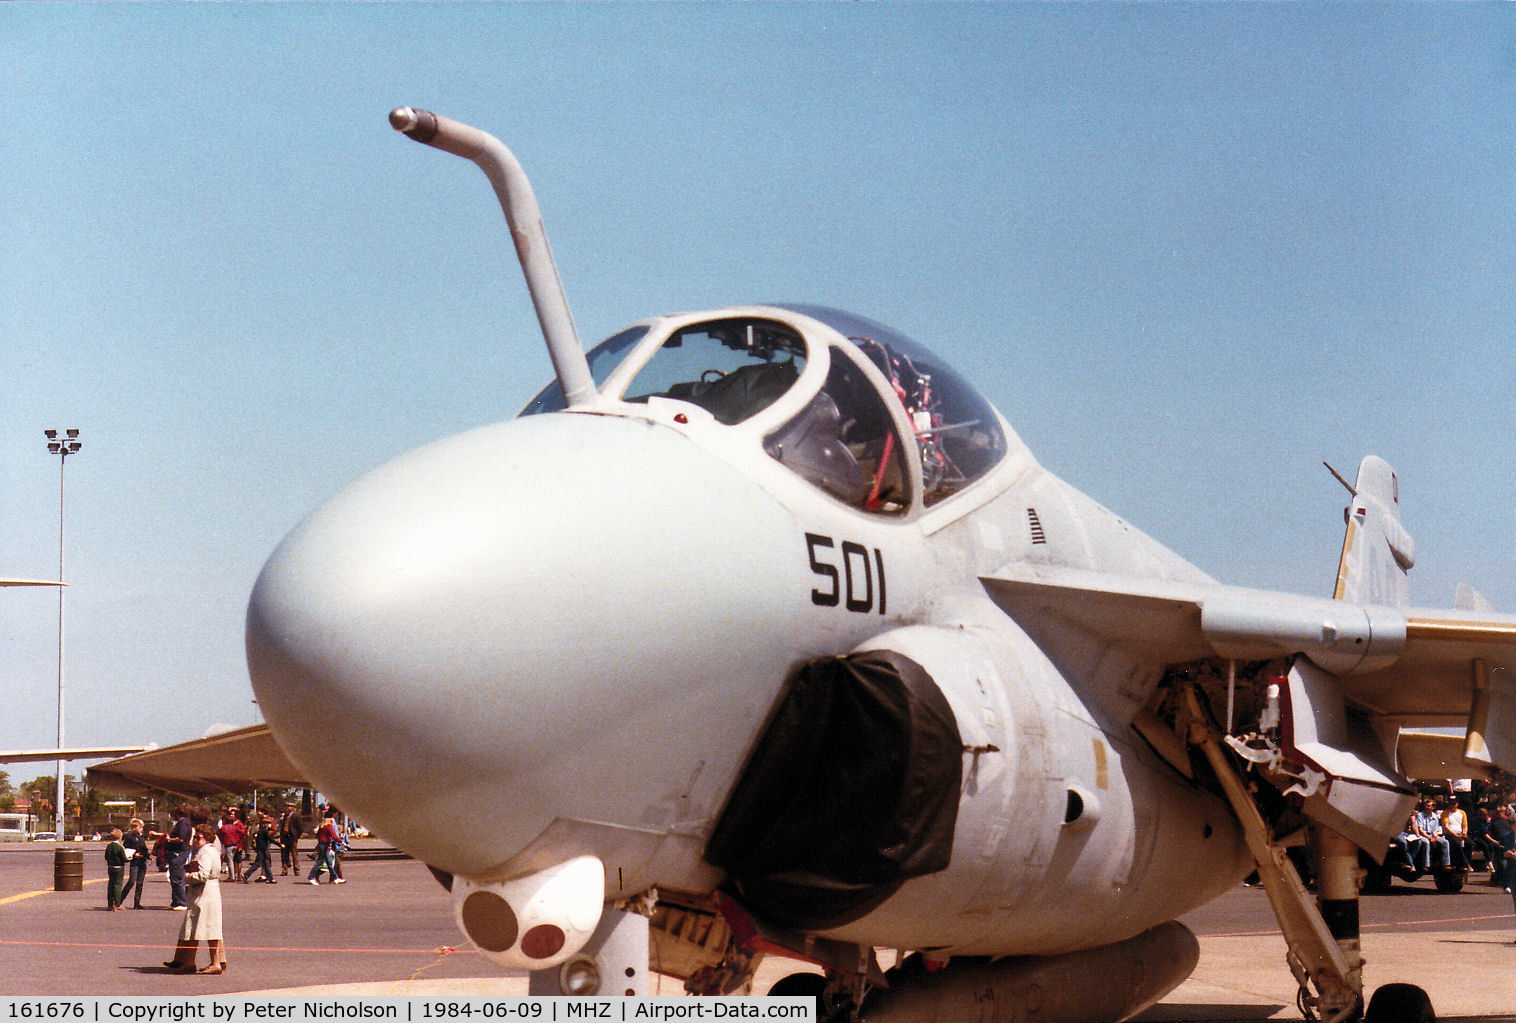 161676, Grumman A-6E Intruder C/N I-653, Another view of the VA-65 A-6E Intruder on display at the 1984 RAF Mildenhall Air Fete.